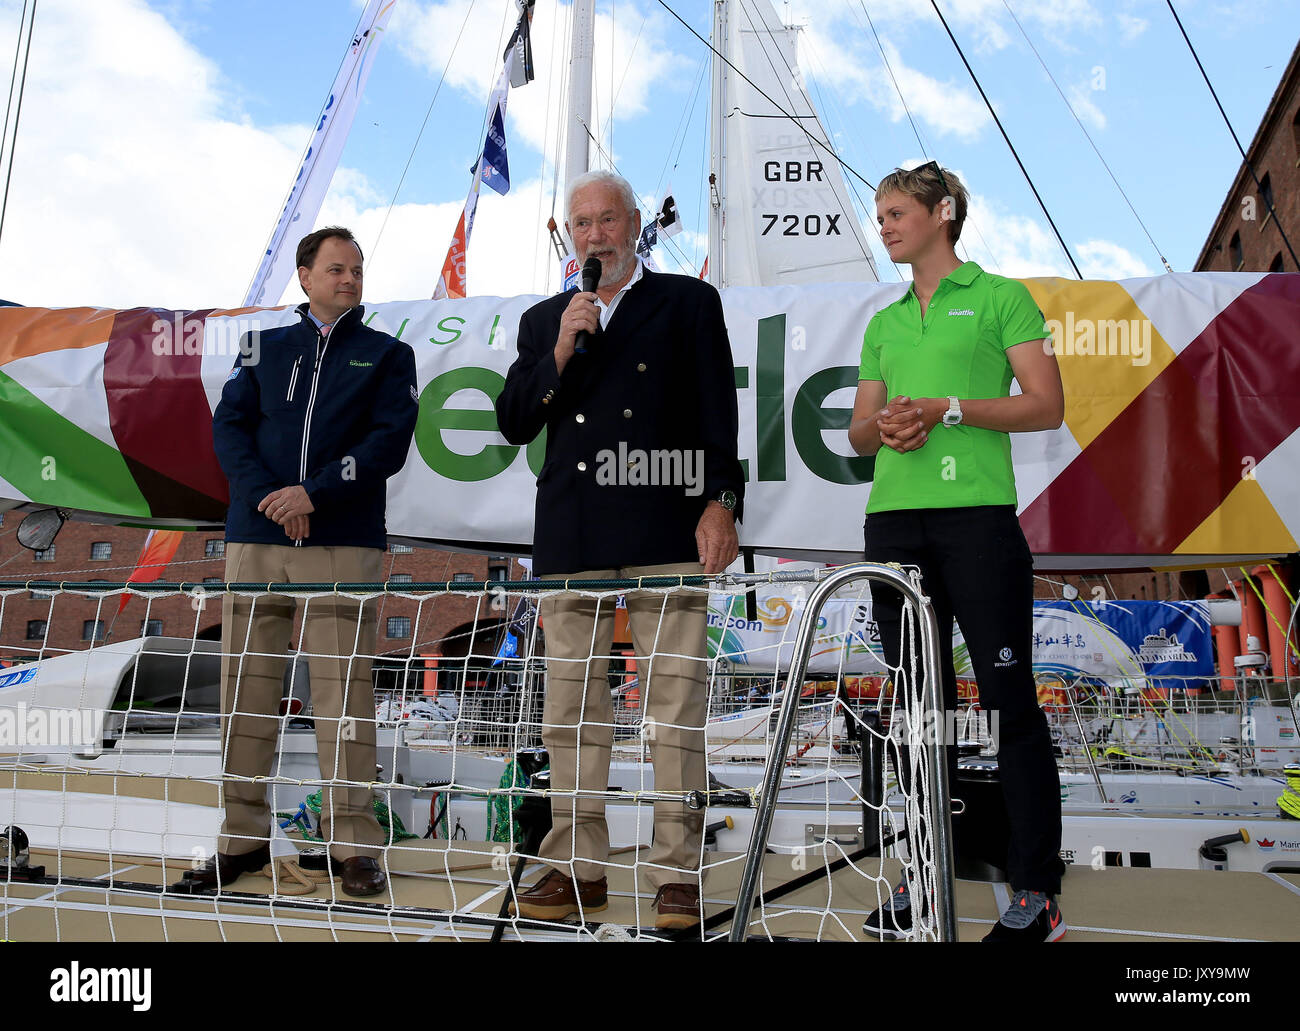 (left to right) Ralph Morton Executive Director at Seattle sports Commission, Sir Robin Knox-Johnston and Nikki Henderson skipper of Visit Seattle at Albert Docks, Liverpool ahead of this Sunday's start of the Clipper Round the World yacht race. PRESS ASSOCIATION Photo. Picture date: Thursday August 17, 2017. Photo credit should read: Clint Hughes/PA Wire Stock Photo